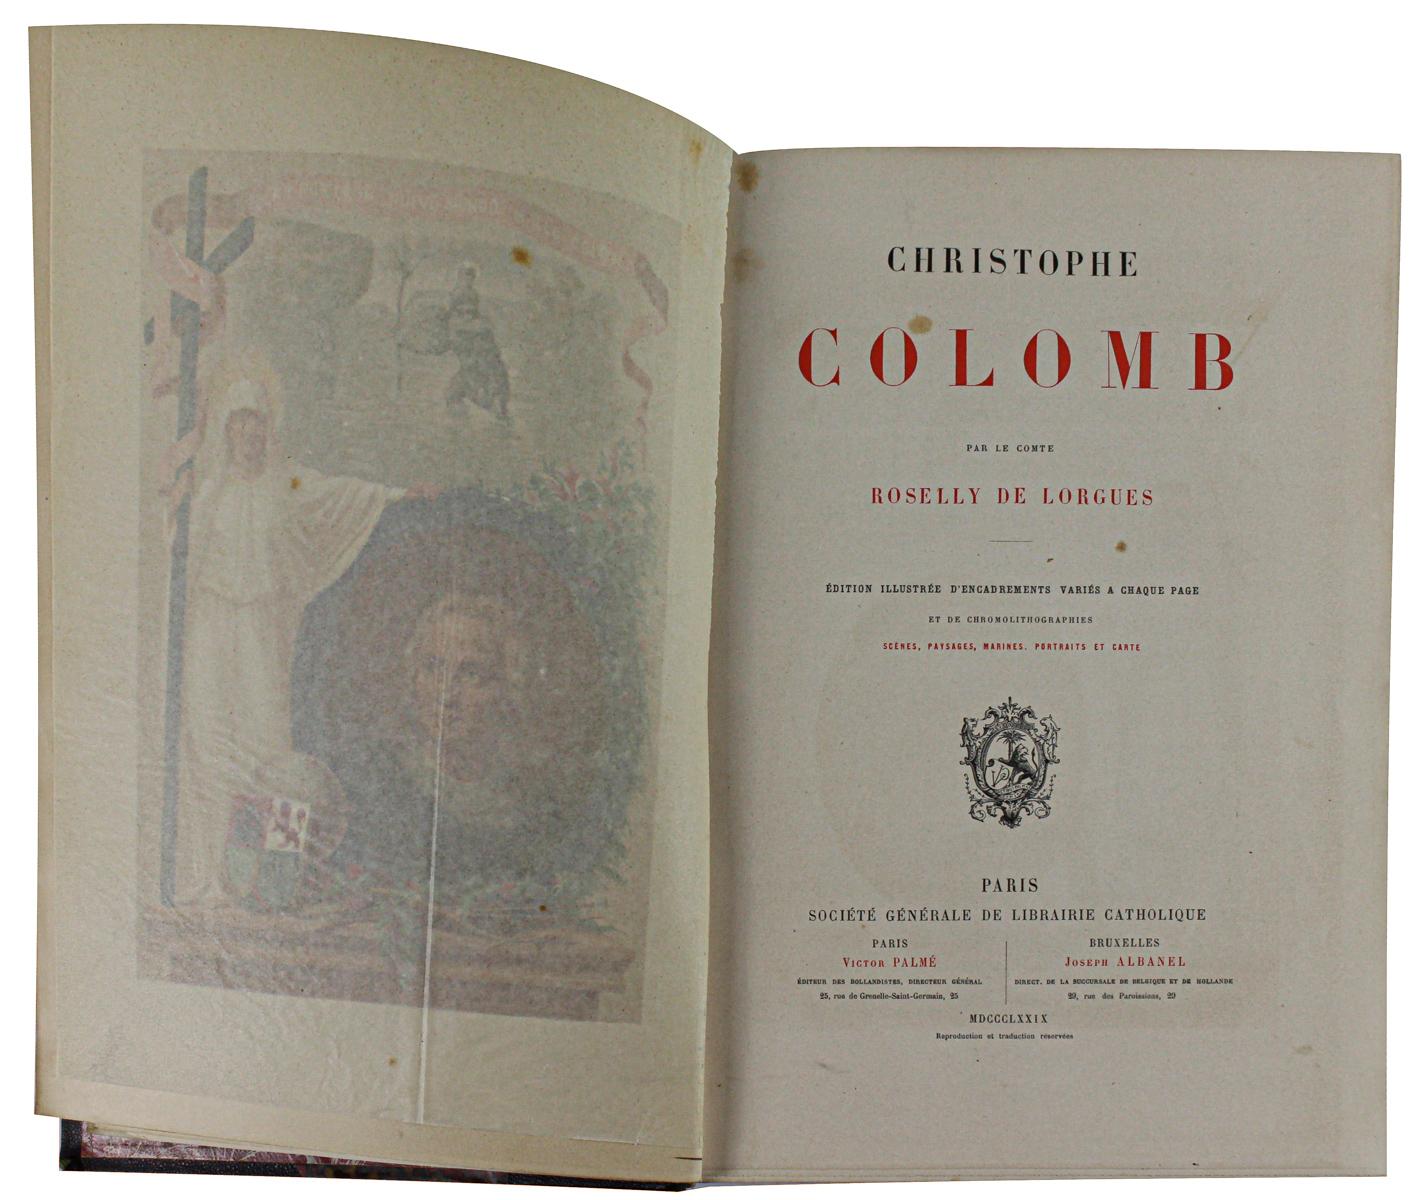 "CHRISTOFHE COLOMB"